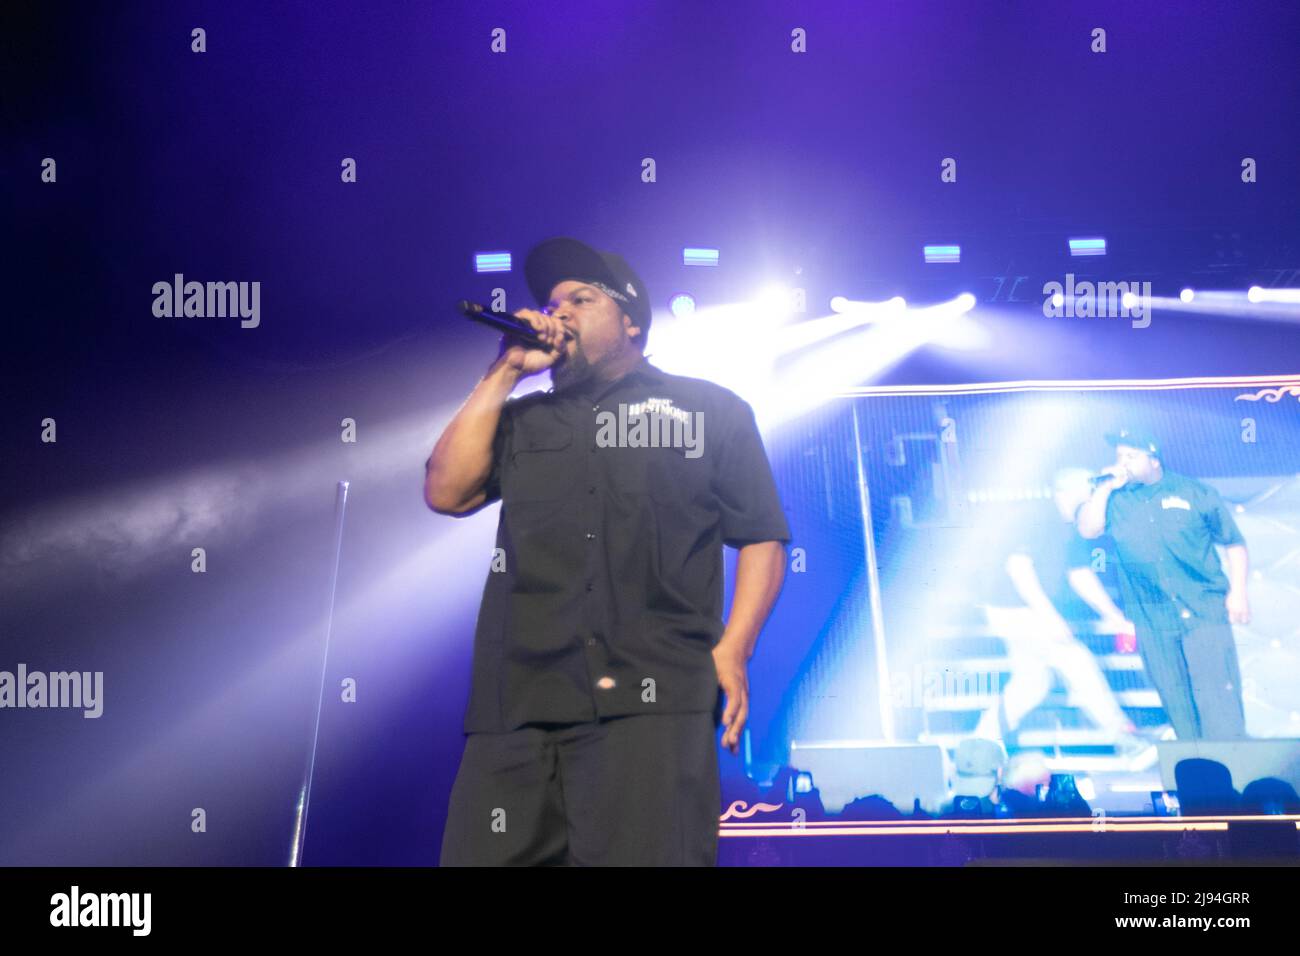 Ice Cube performs with Mount Westmore on Thursday, May 19, 2022 at Pechanga Arena in San Diego, California. Mount Westmore is a hip hop supergroup that includes Snoop Dogg, Ice Cube, E-40, and Too Short. They will be releasing their debut album later this year. (Photo by Rishi Deka/Sipa USA) Credit: Sipa USA/Alamy Live News Stock Photo